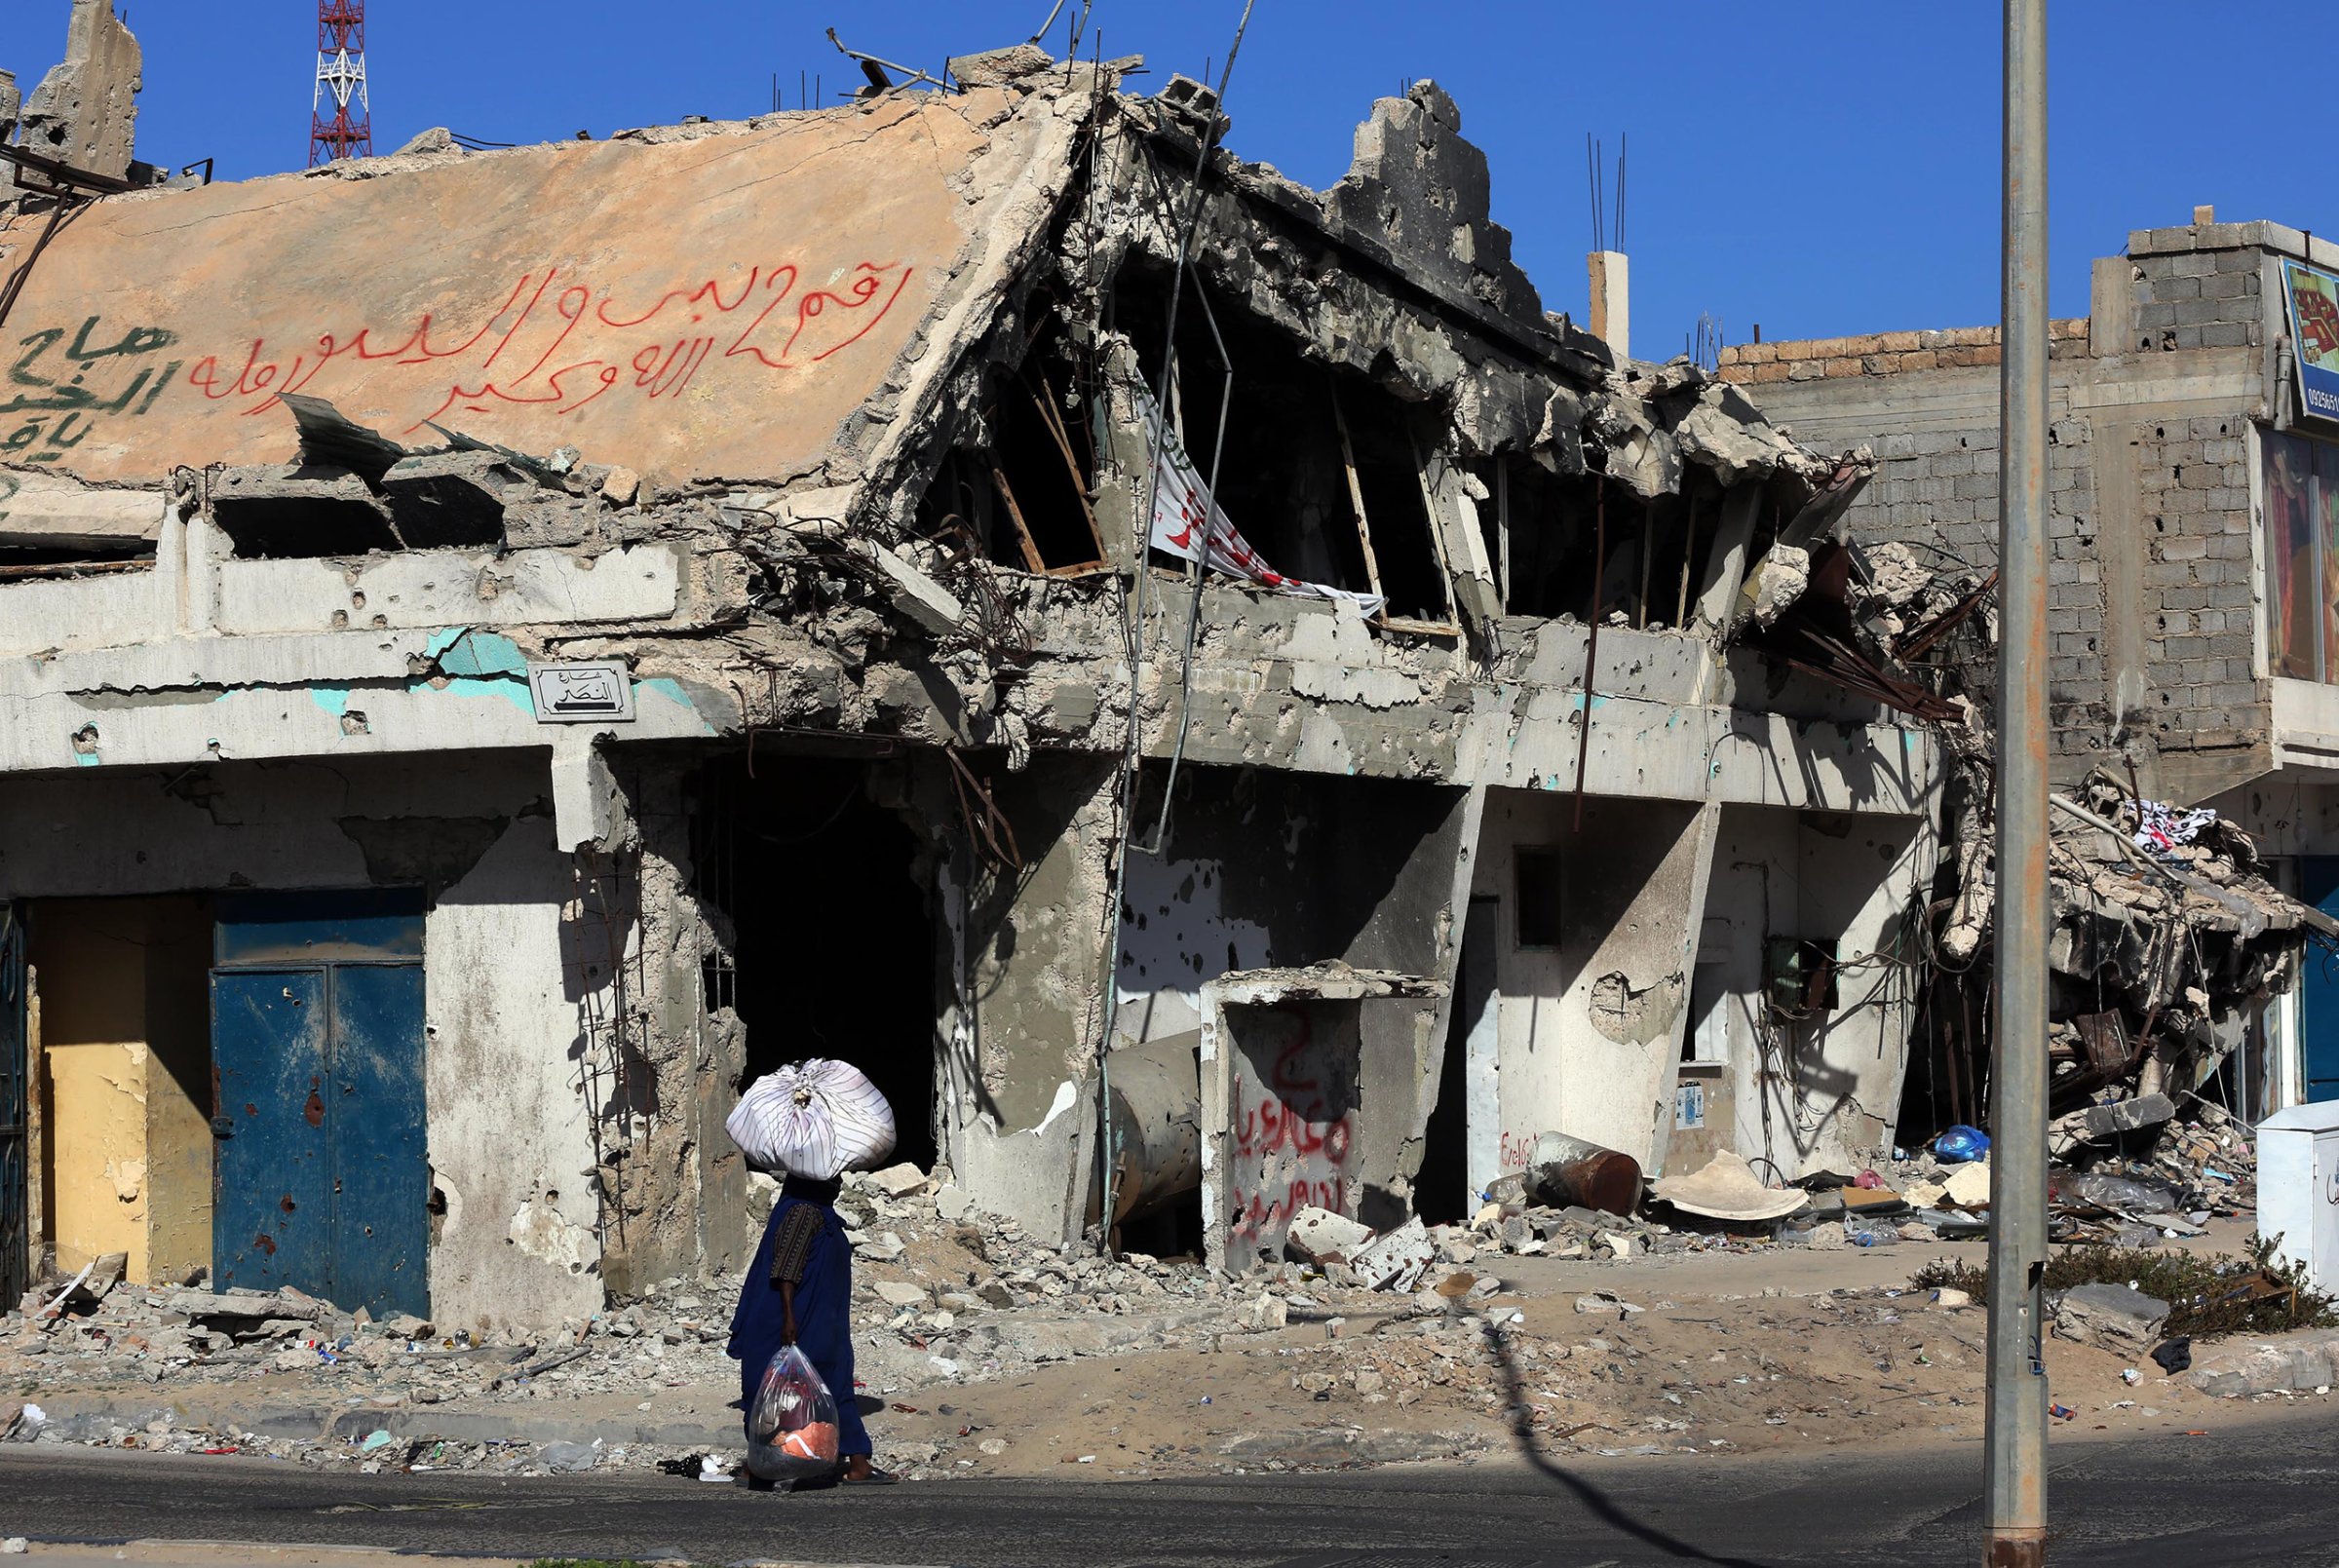 A Libyan woman walks past the rubble of a building in the Mediterranean city of Sirte, Oct. 13, 2012.